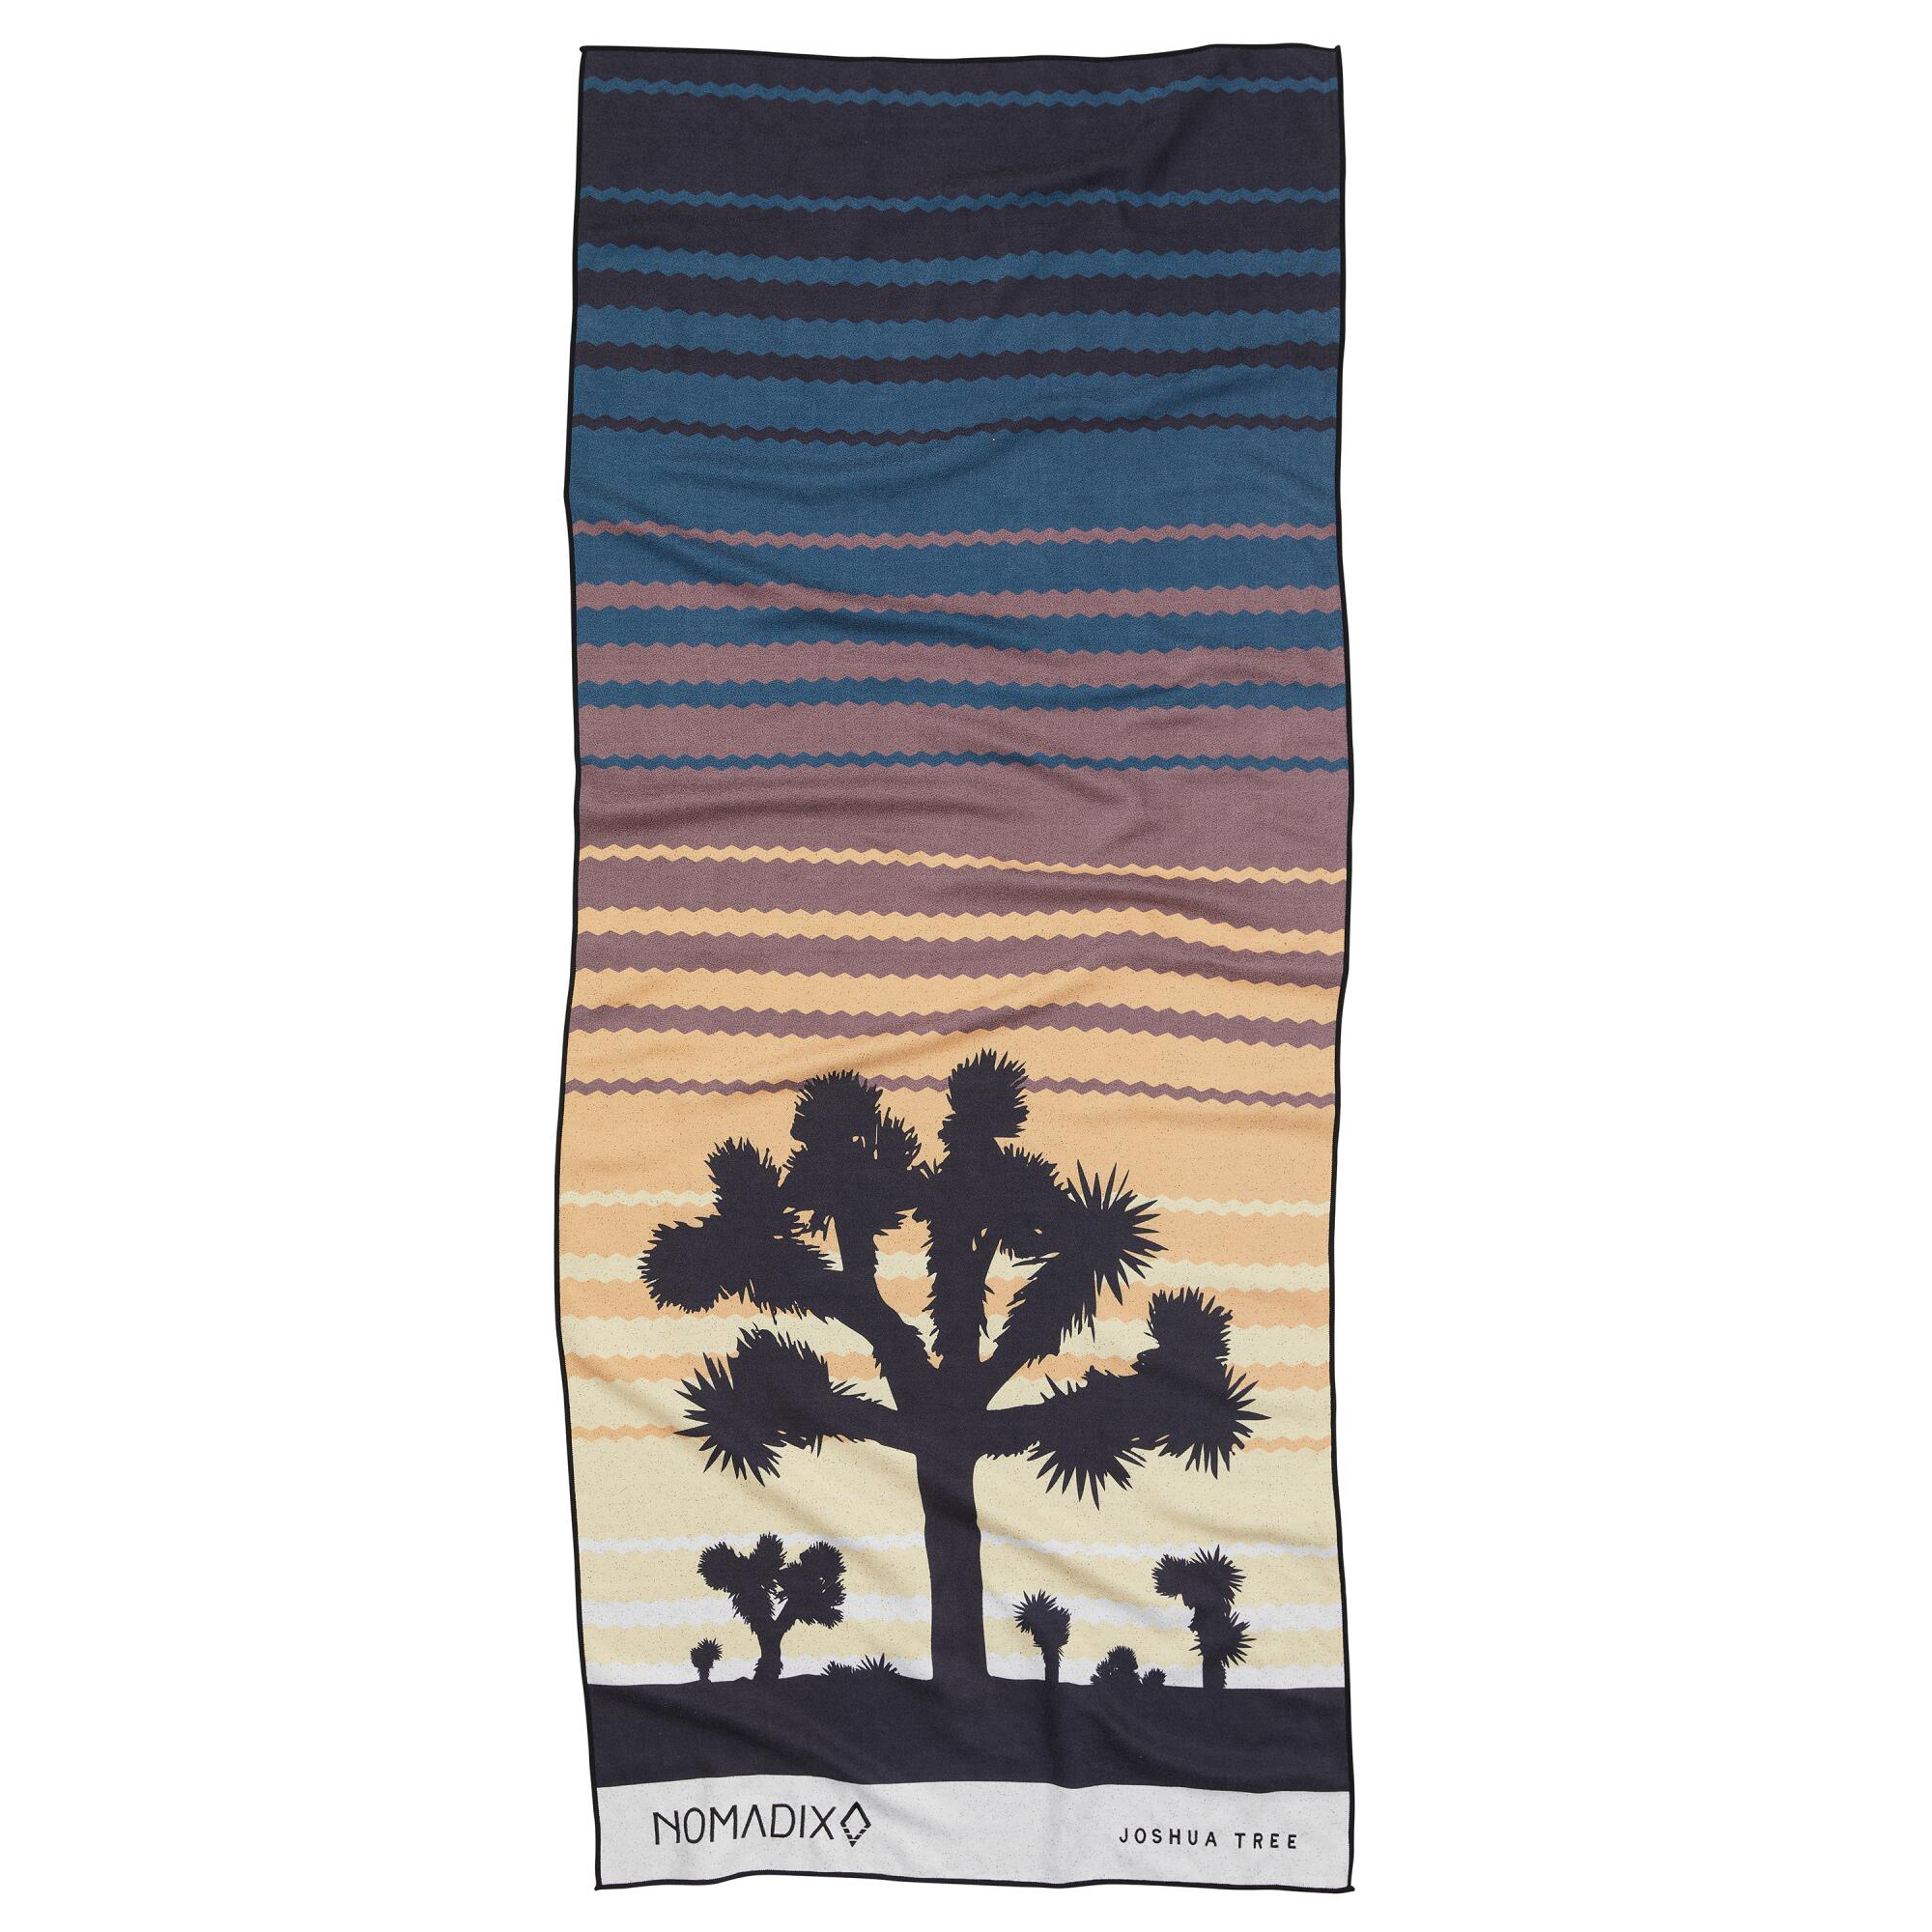 GIFT GUIDE 2021- OUTDOORS: Nomadix towels